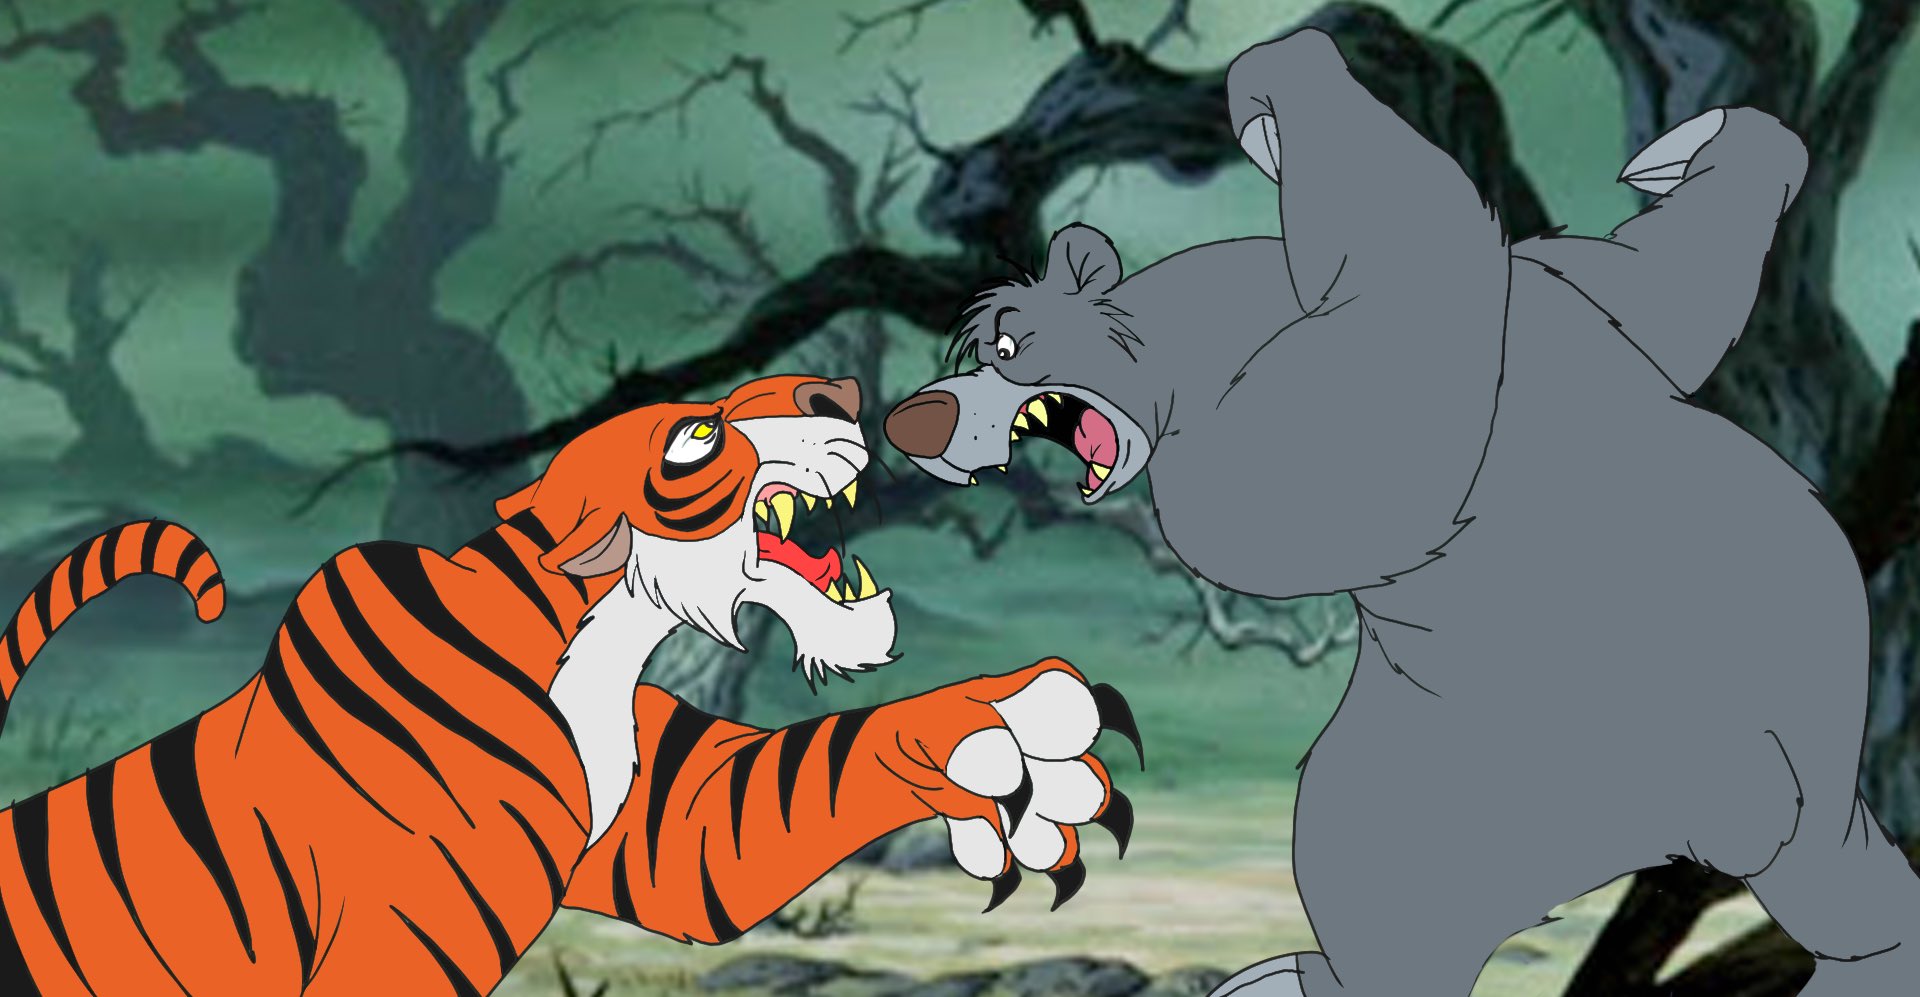 "Baloo could have just cracked Shere Khan’s head like a f* walnut. 